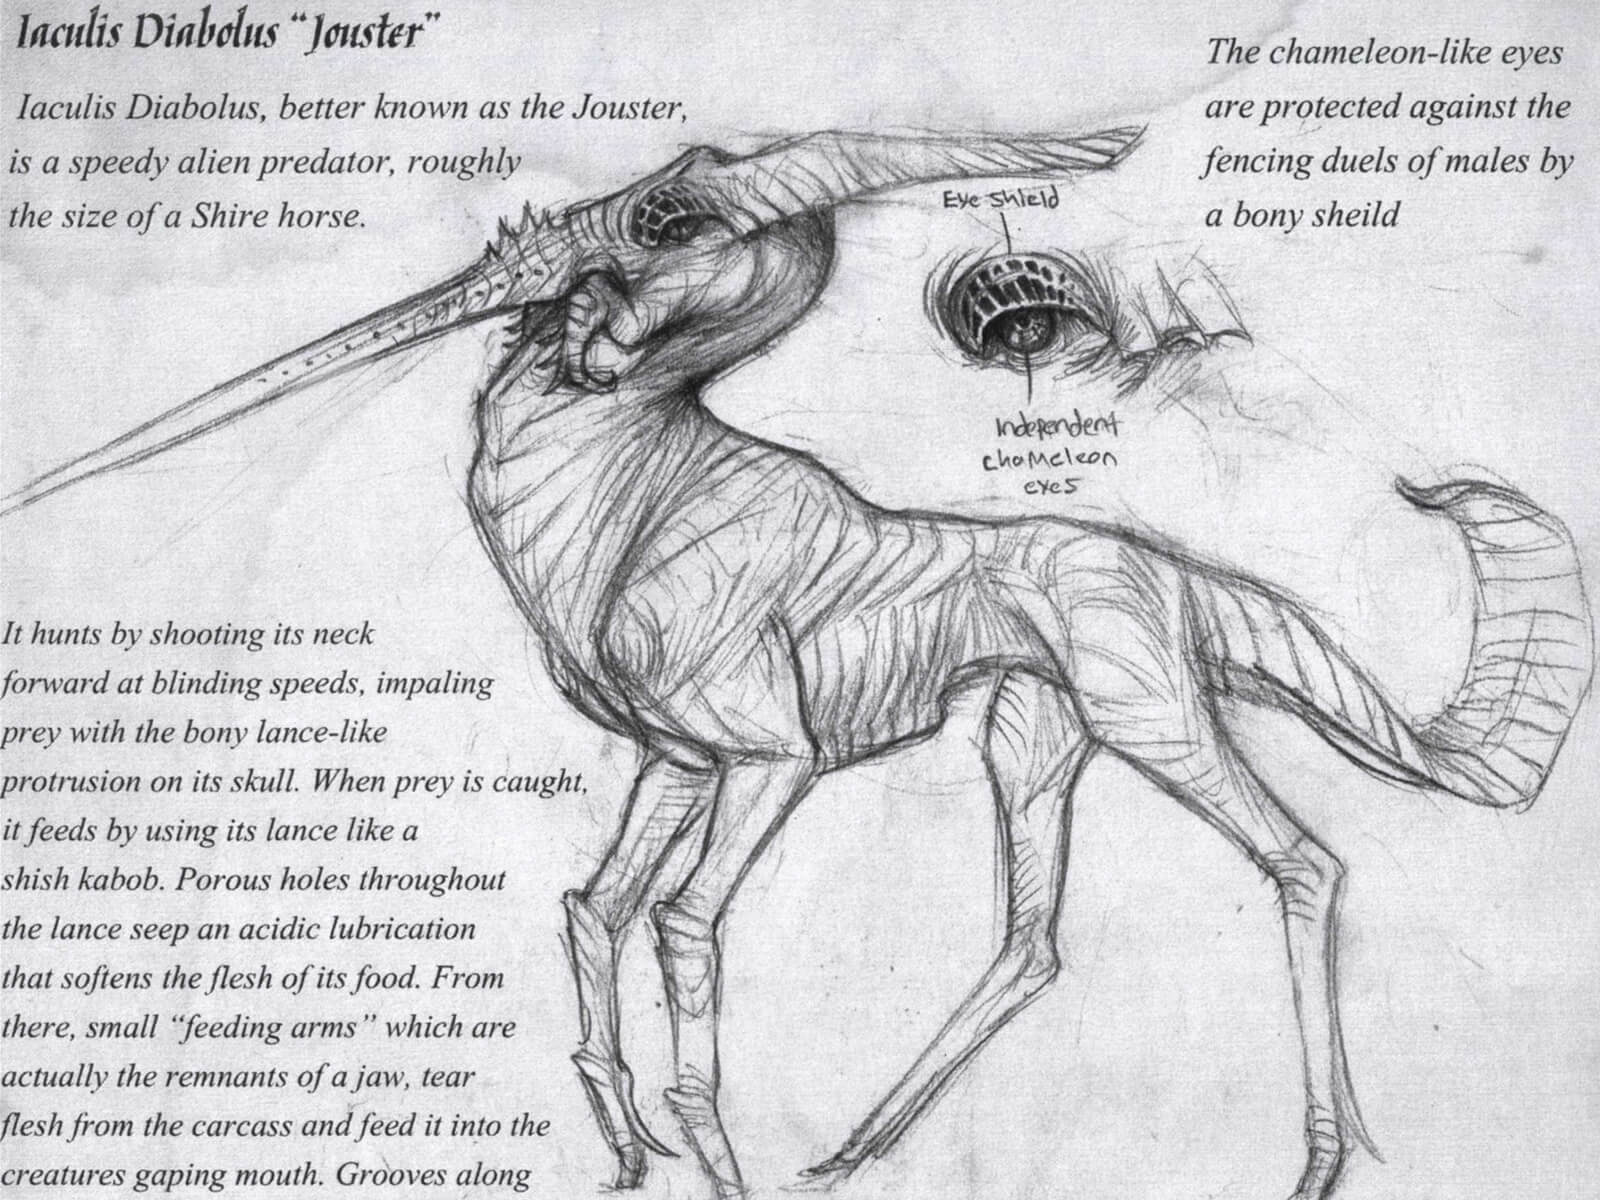 black and white drawing of the anatomy of an alien predator with a horse's body and a lance-like protusion on its skull